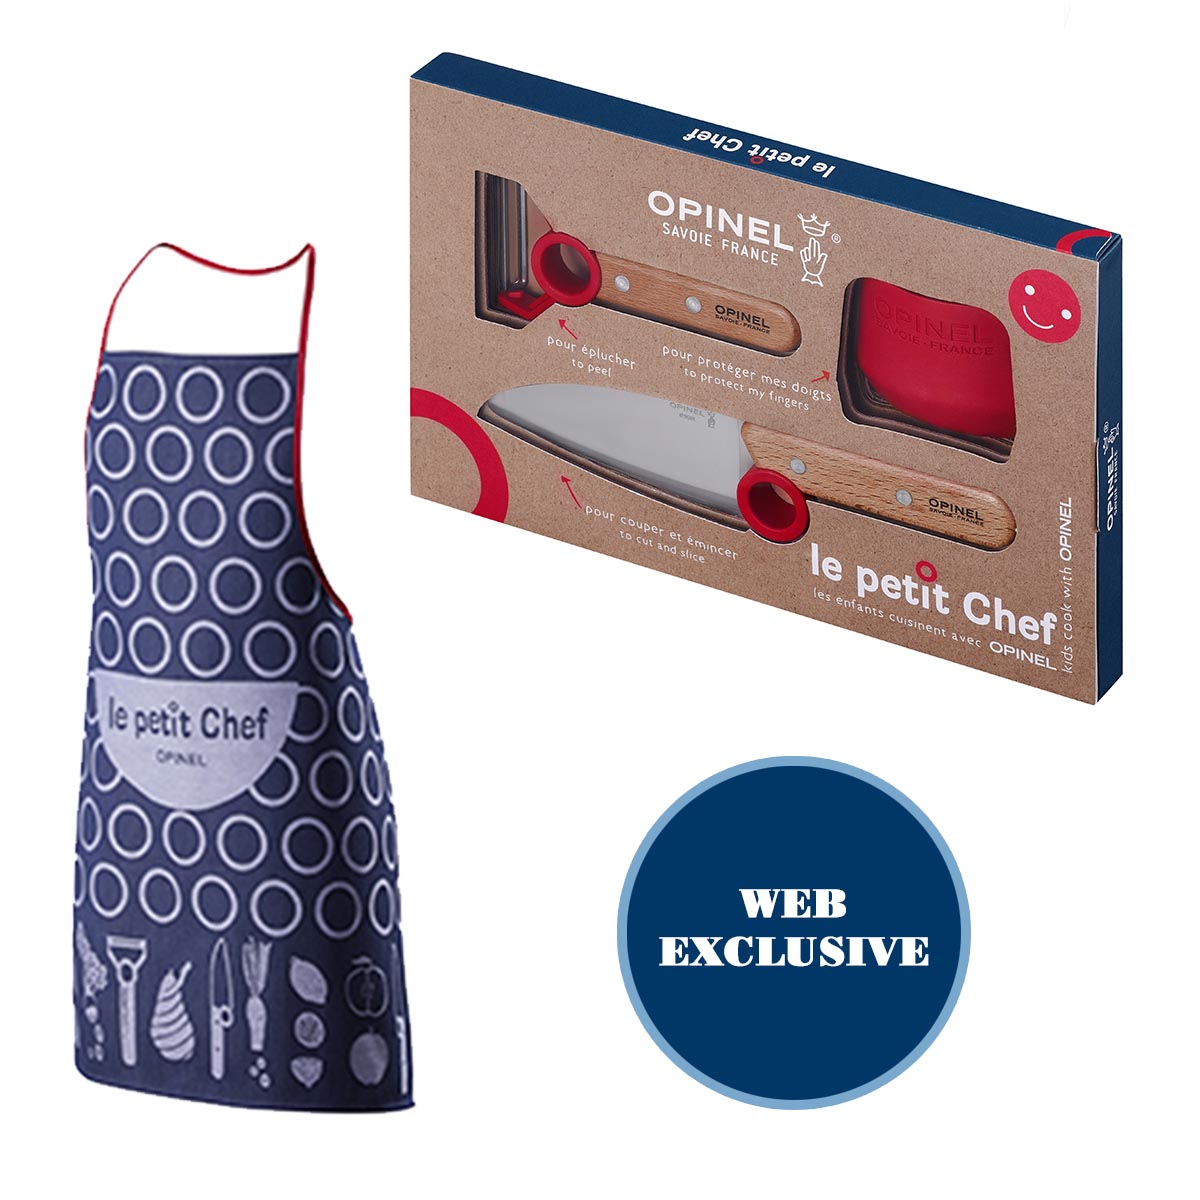 Opinel “Start them young” Kit-OPINEL USA